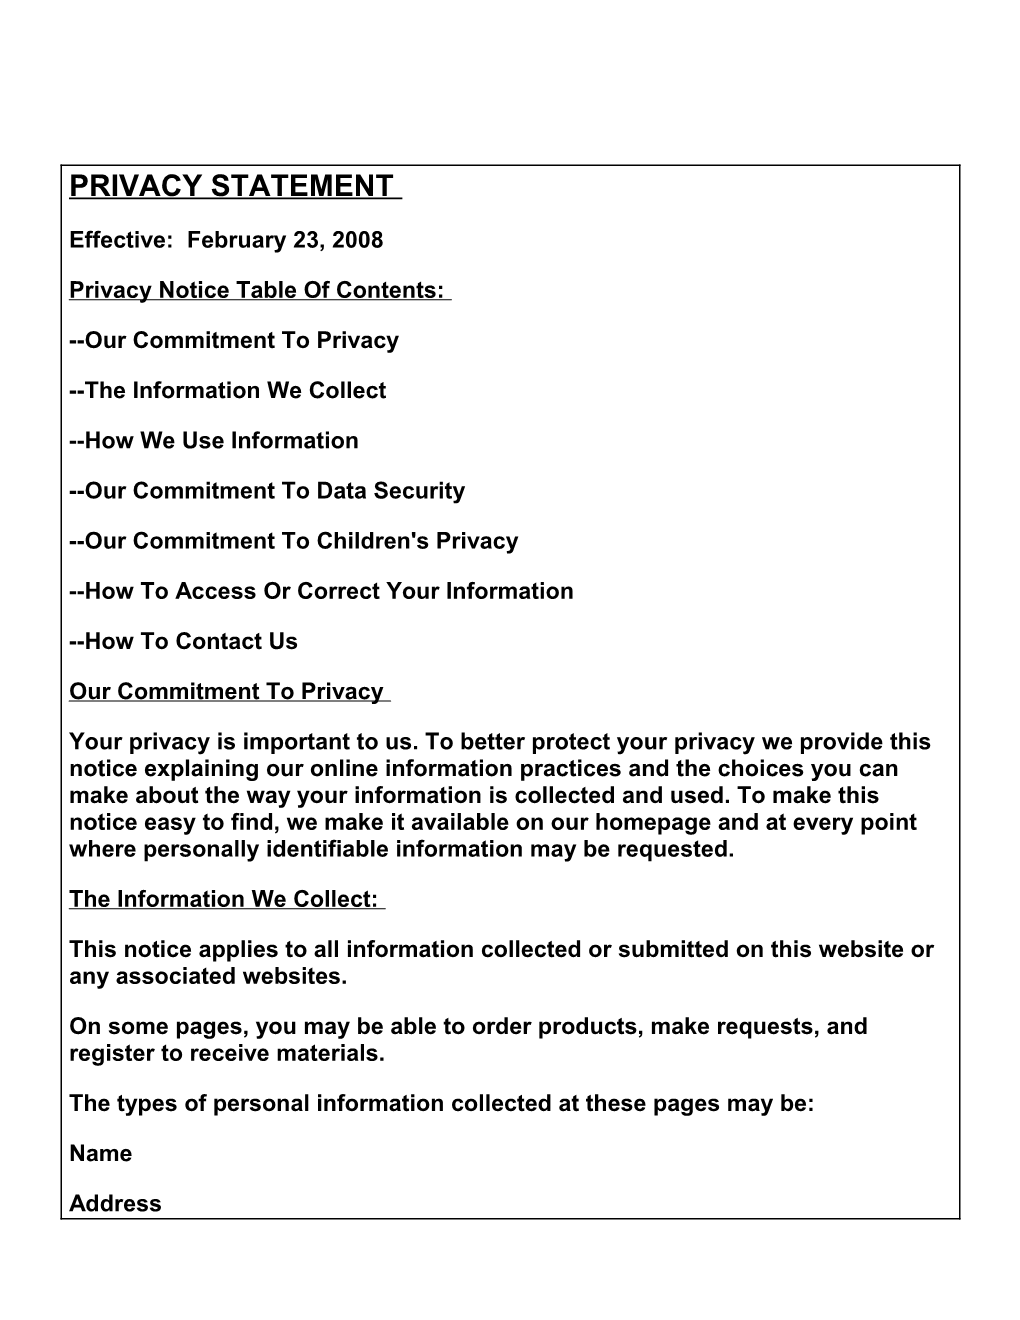 Privacy Notice Table of Contents